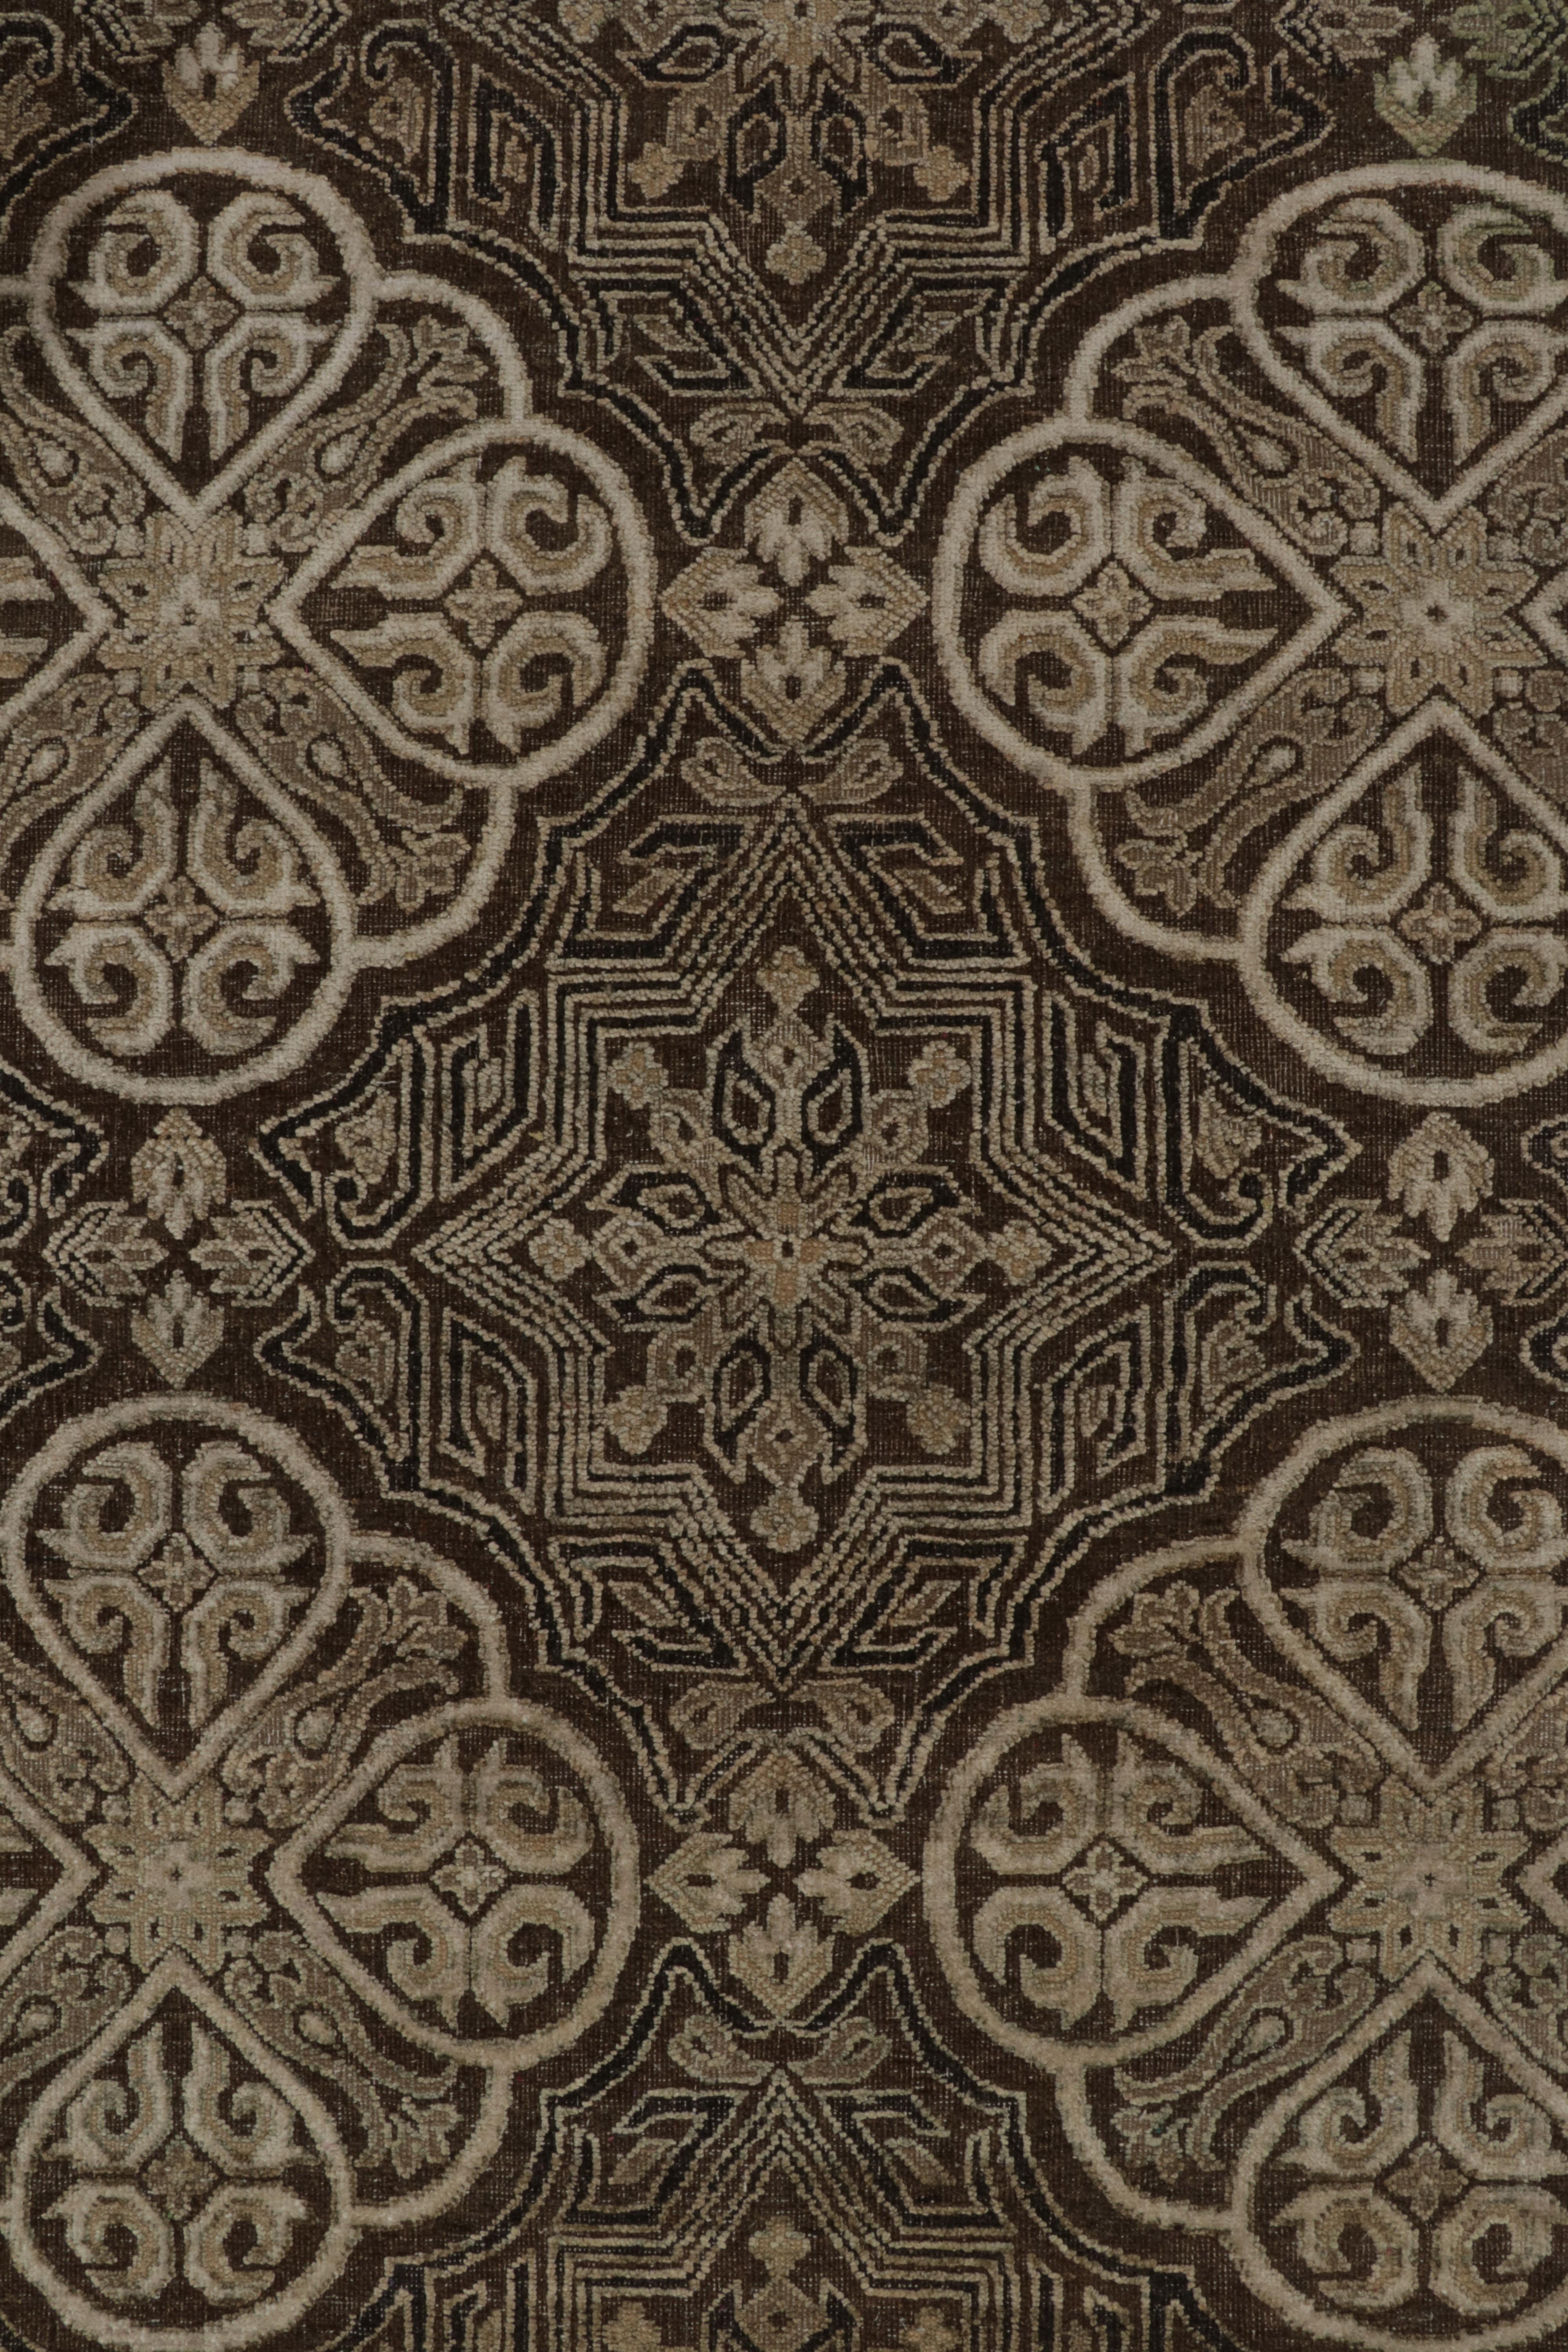 Contemporary Rug & Kilim’s Spanish Classic style rug in Beige-Brown, Black Geometric Patterns For Sale